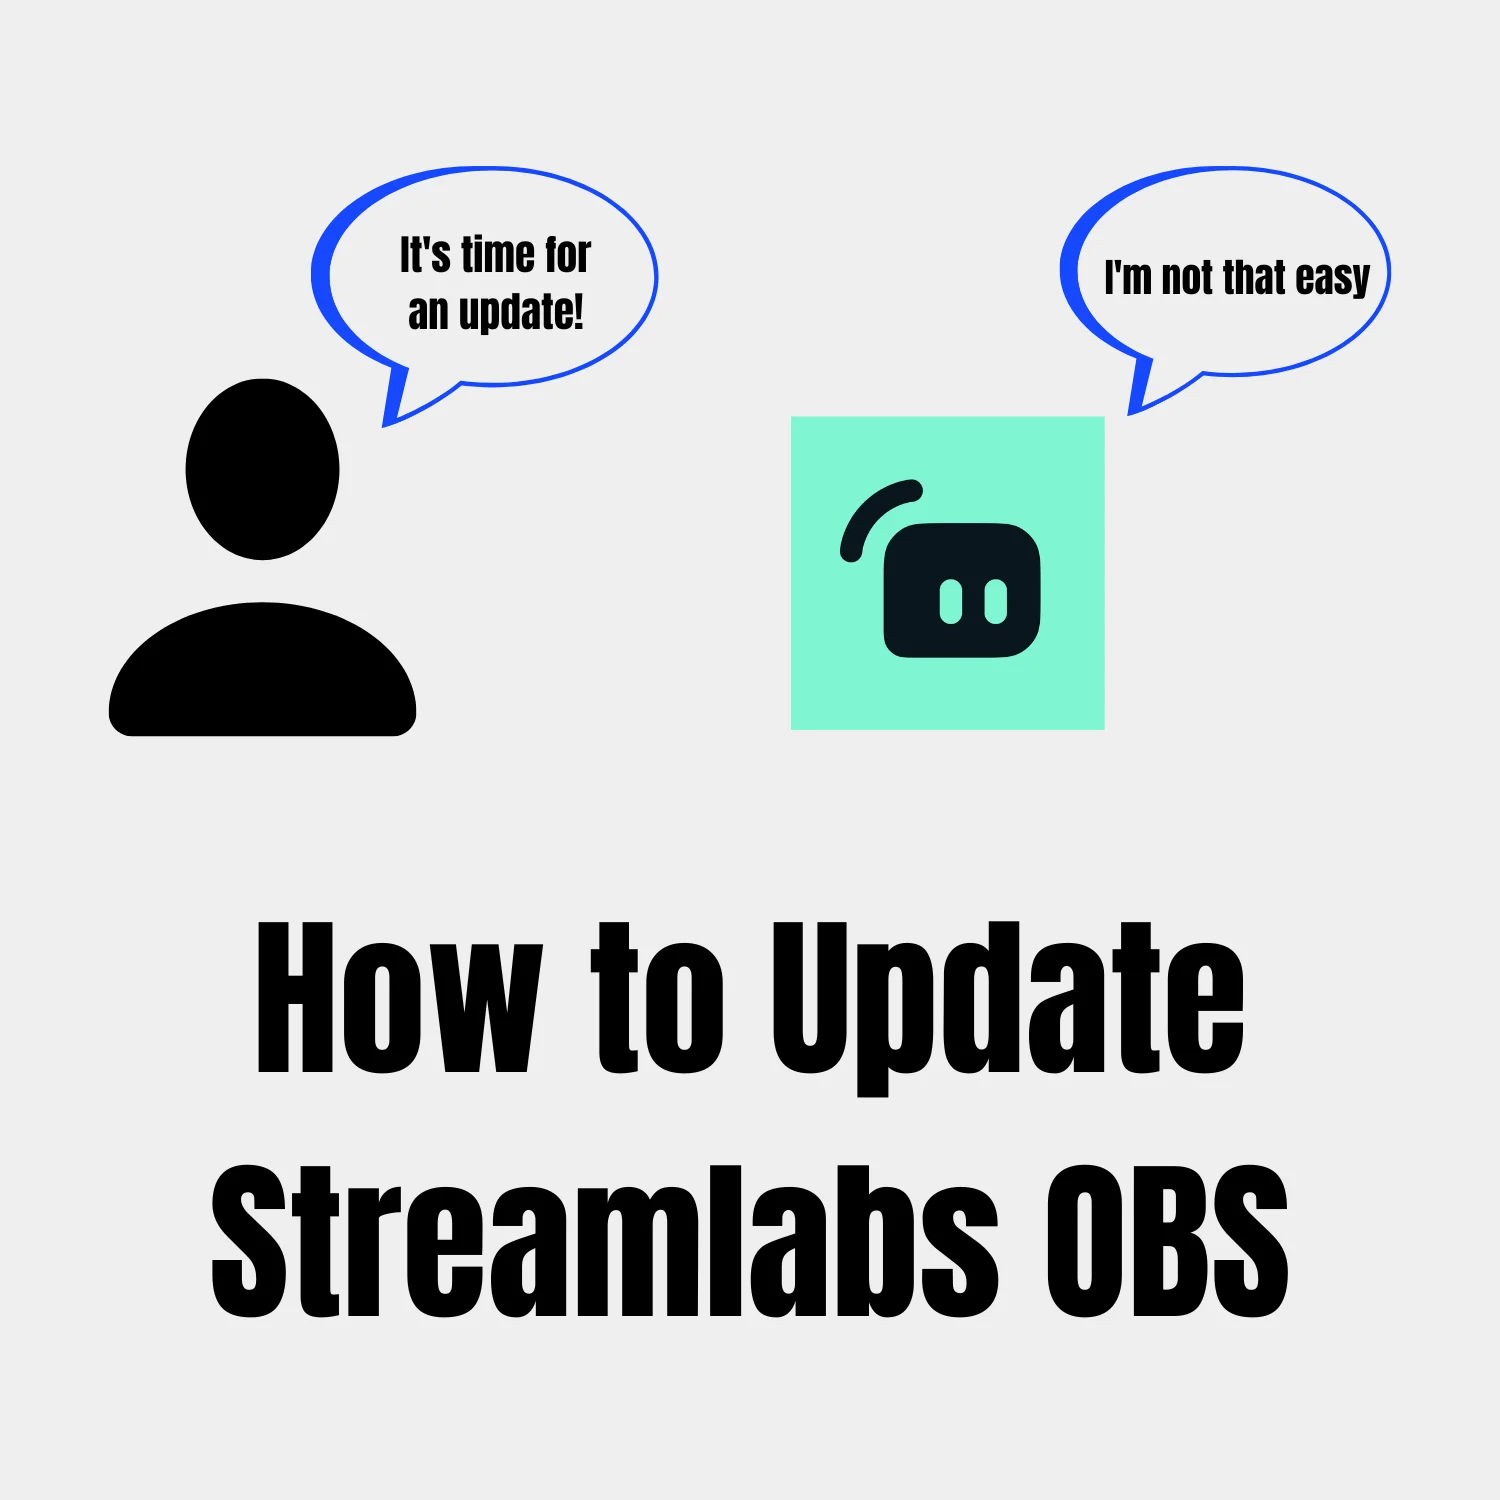 How to Update Streamlabs OBS